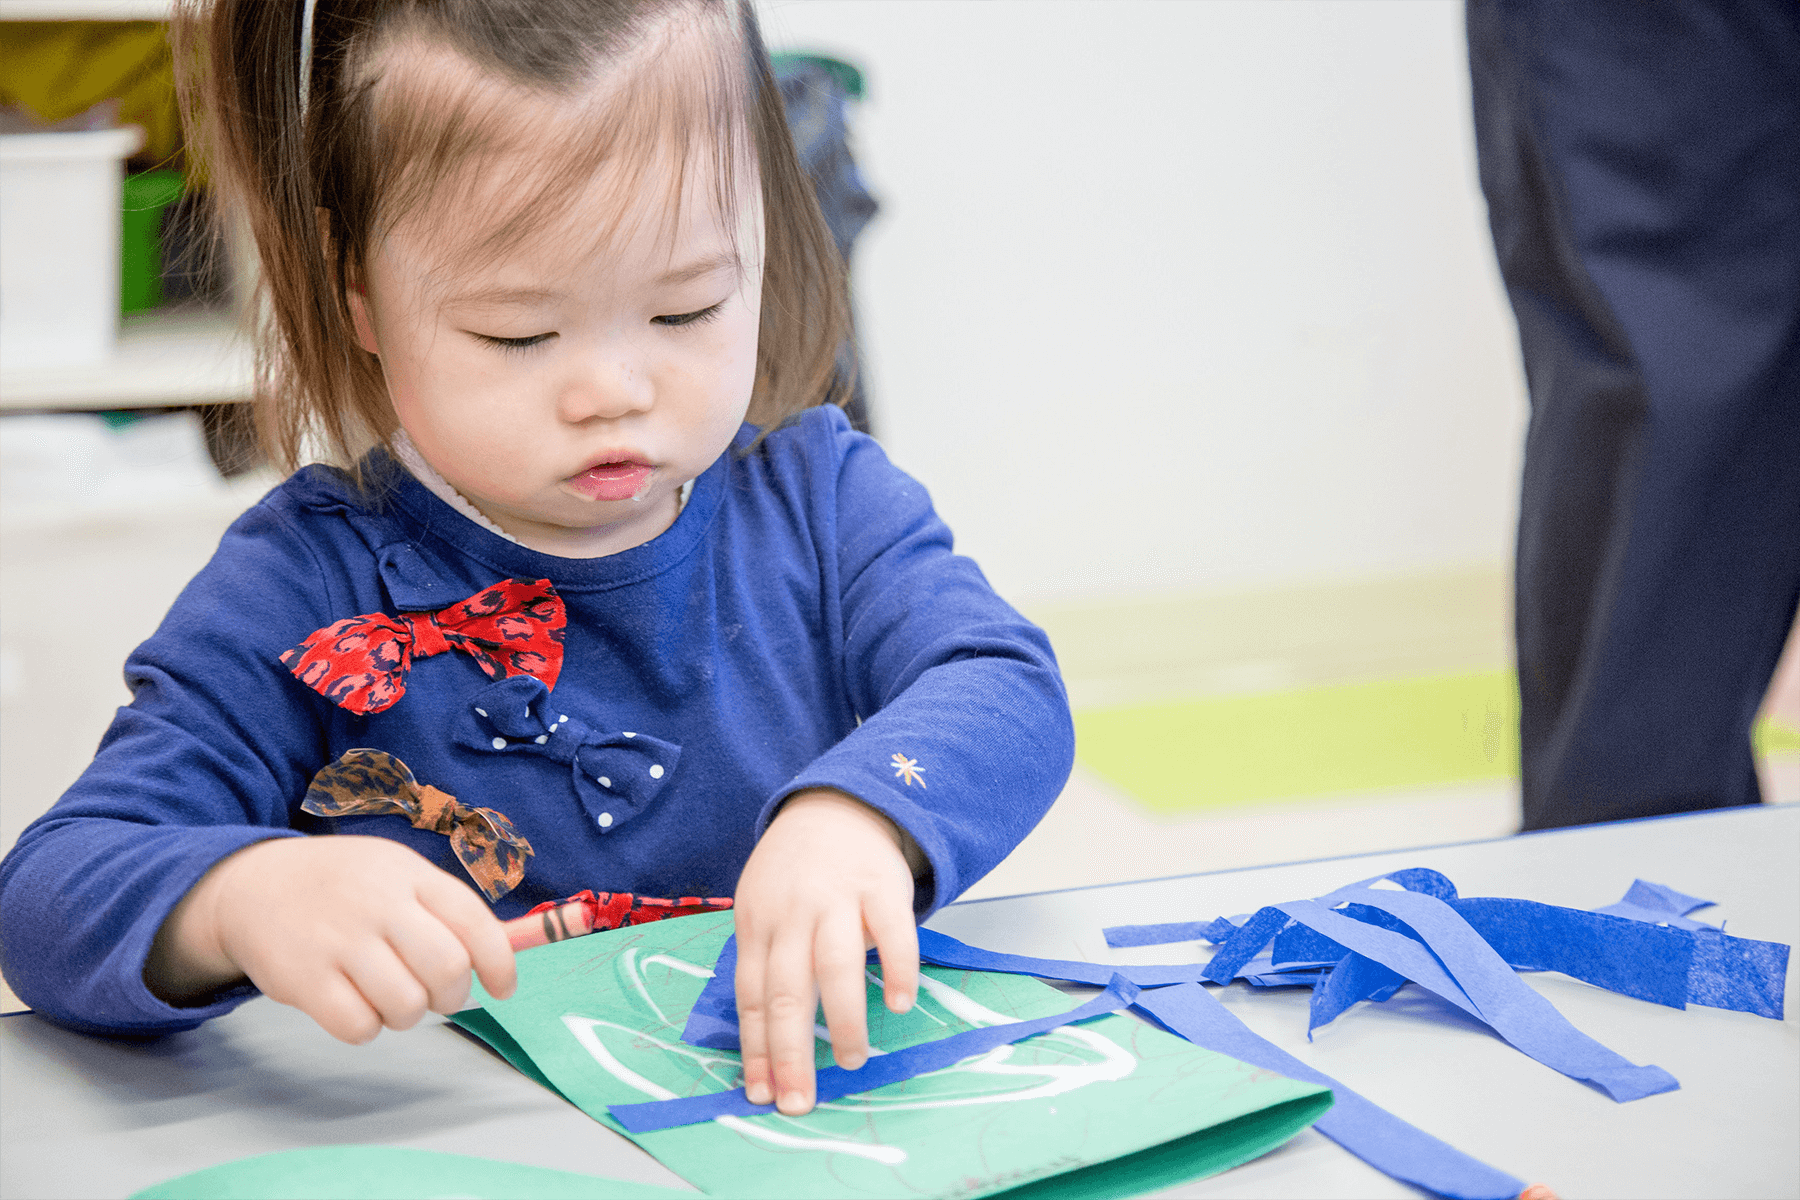 Child doing arts and crafts at day care